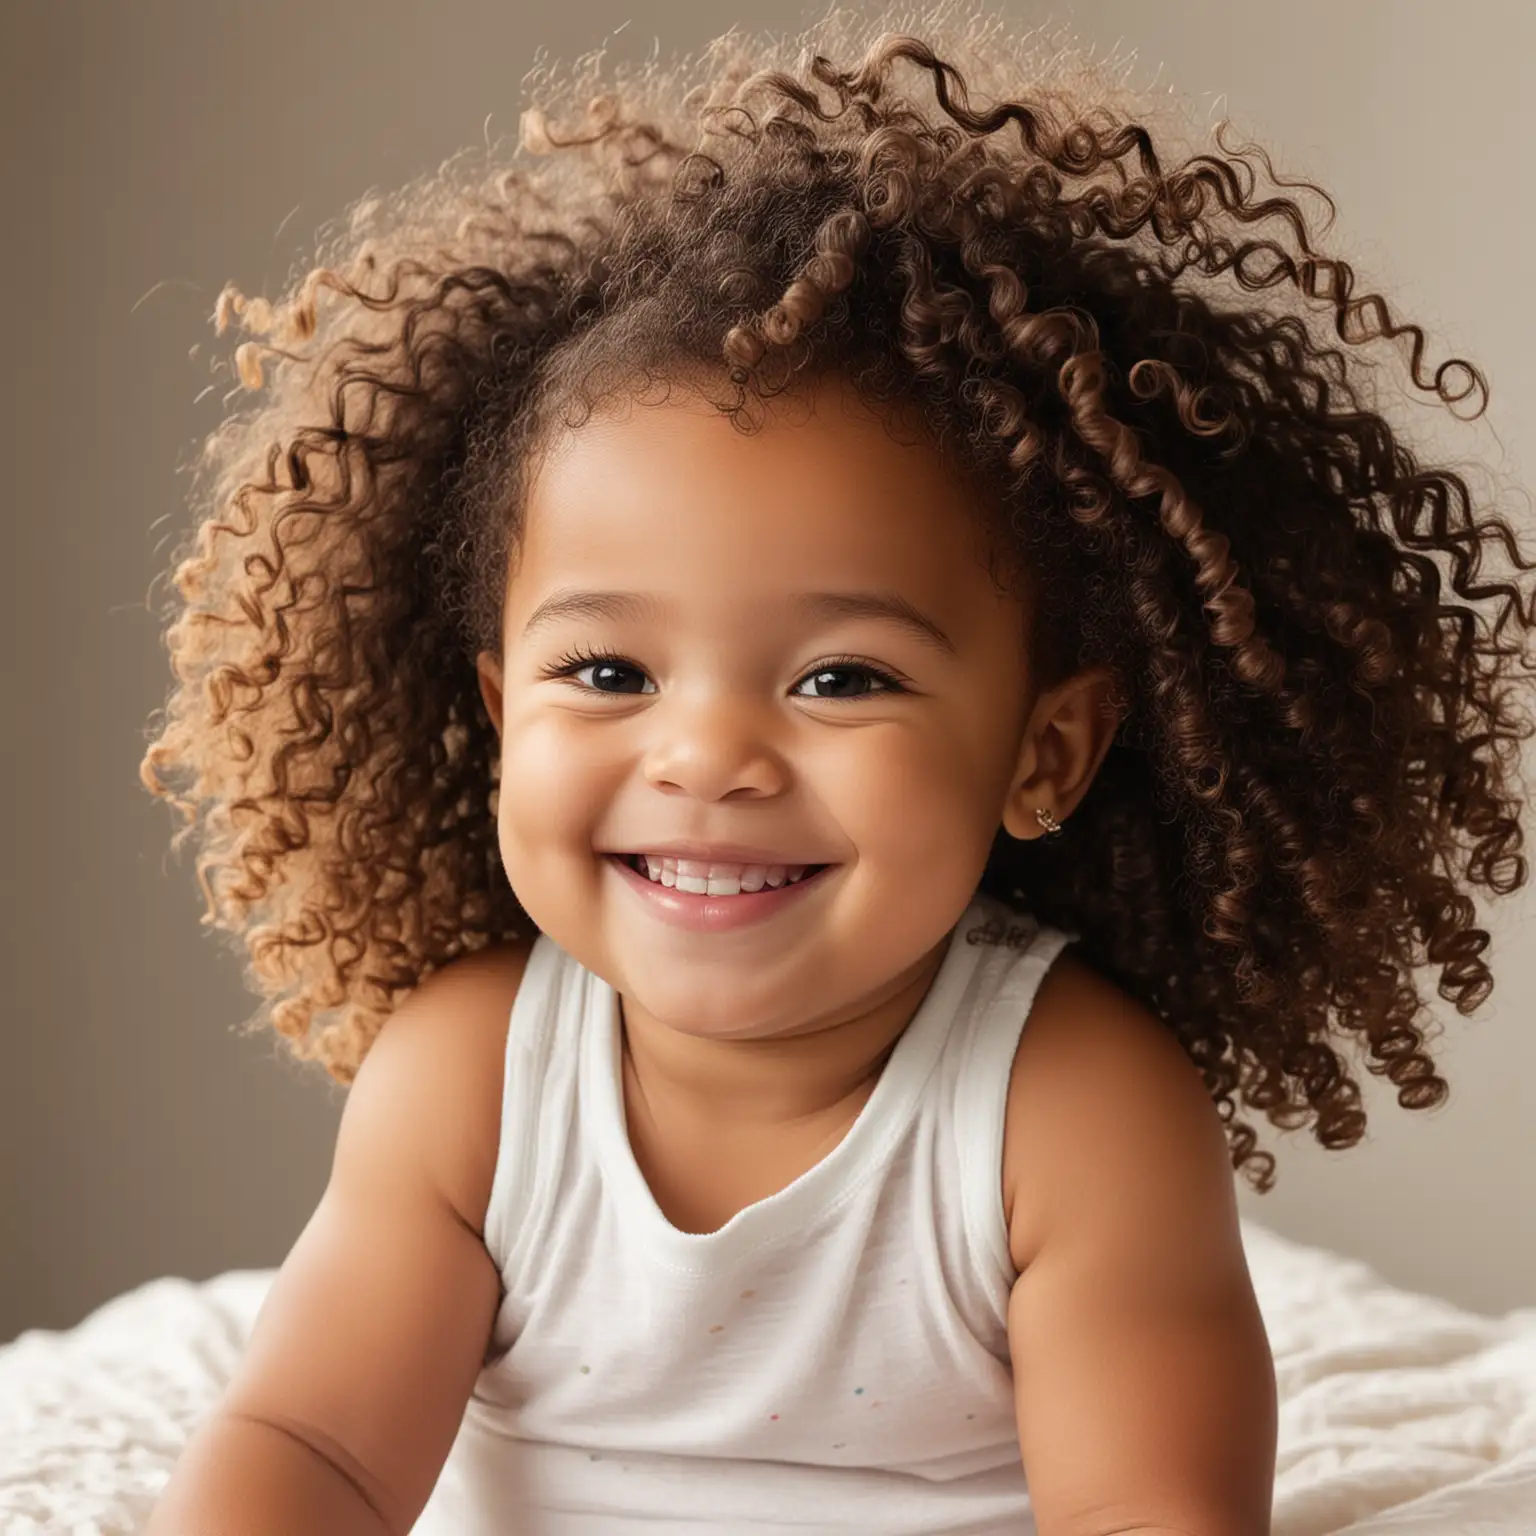 African American baby, curly hair, smiling,